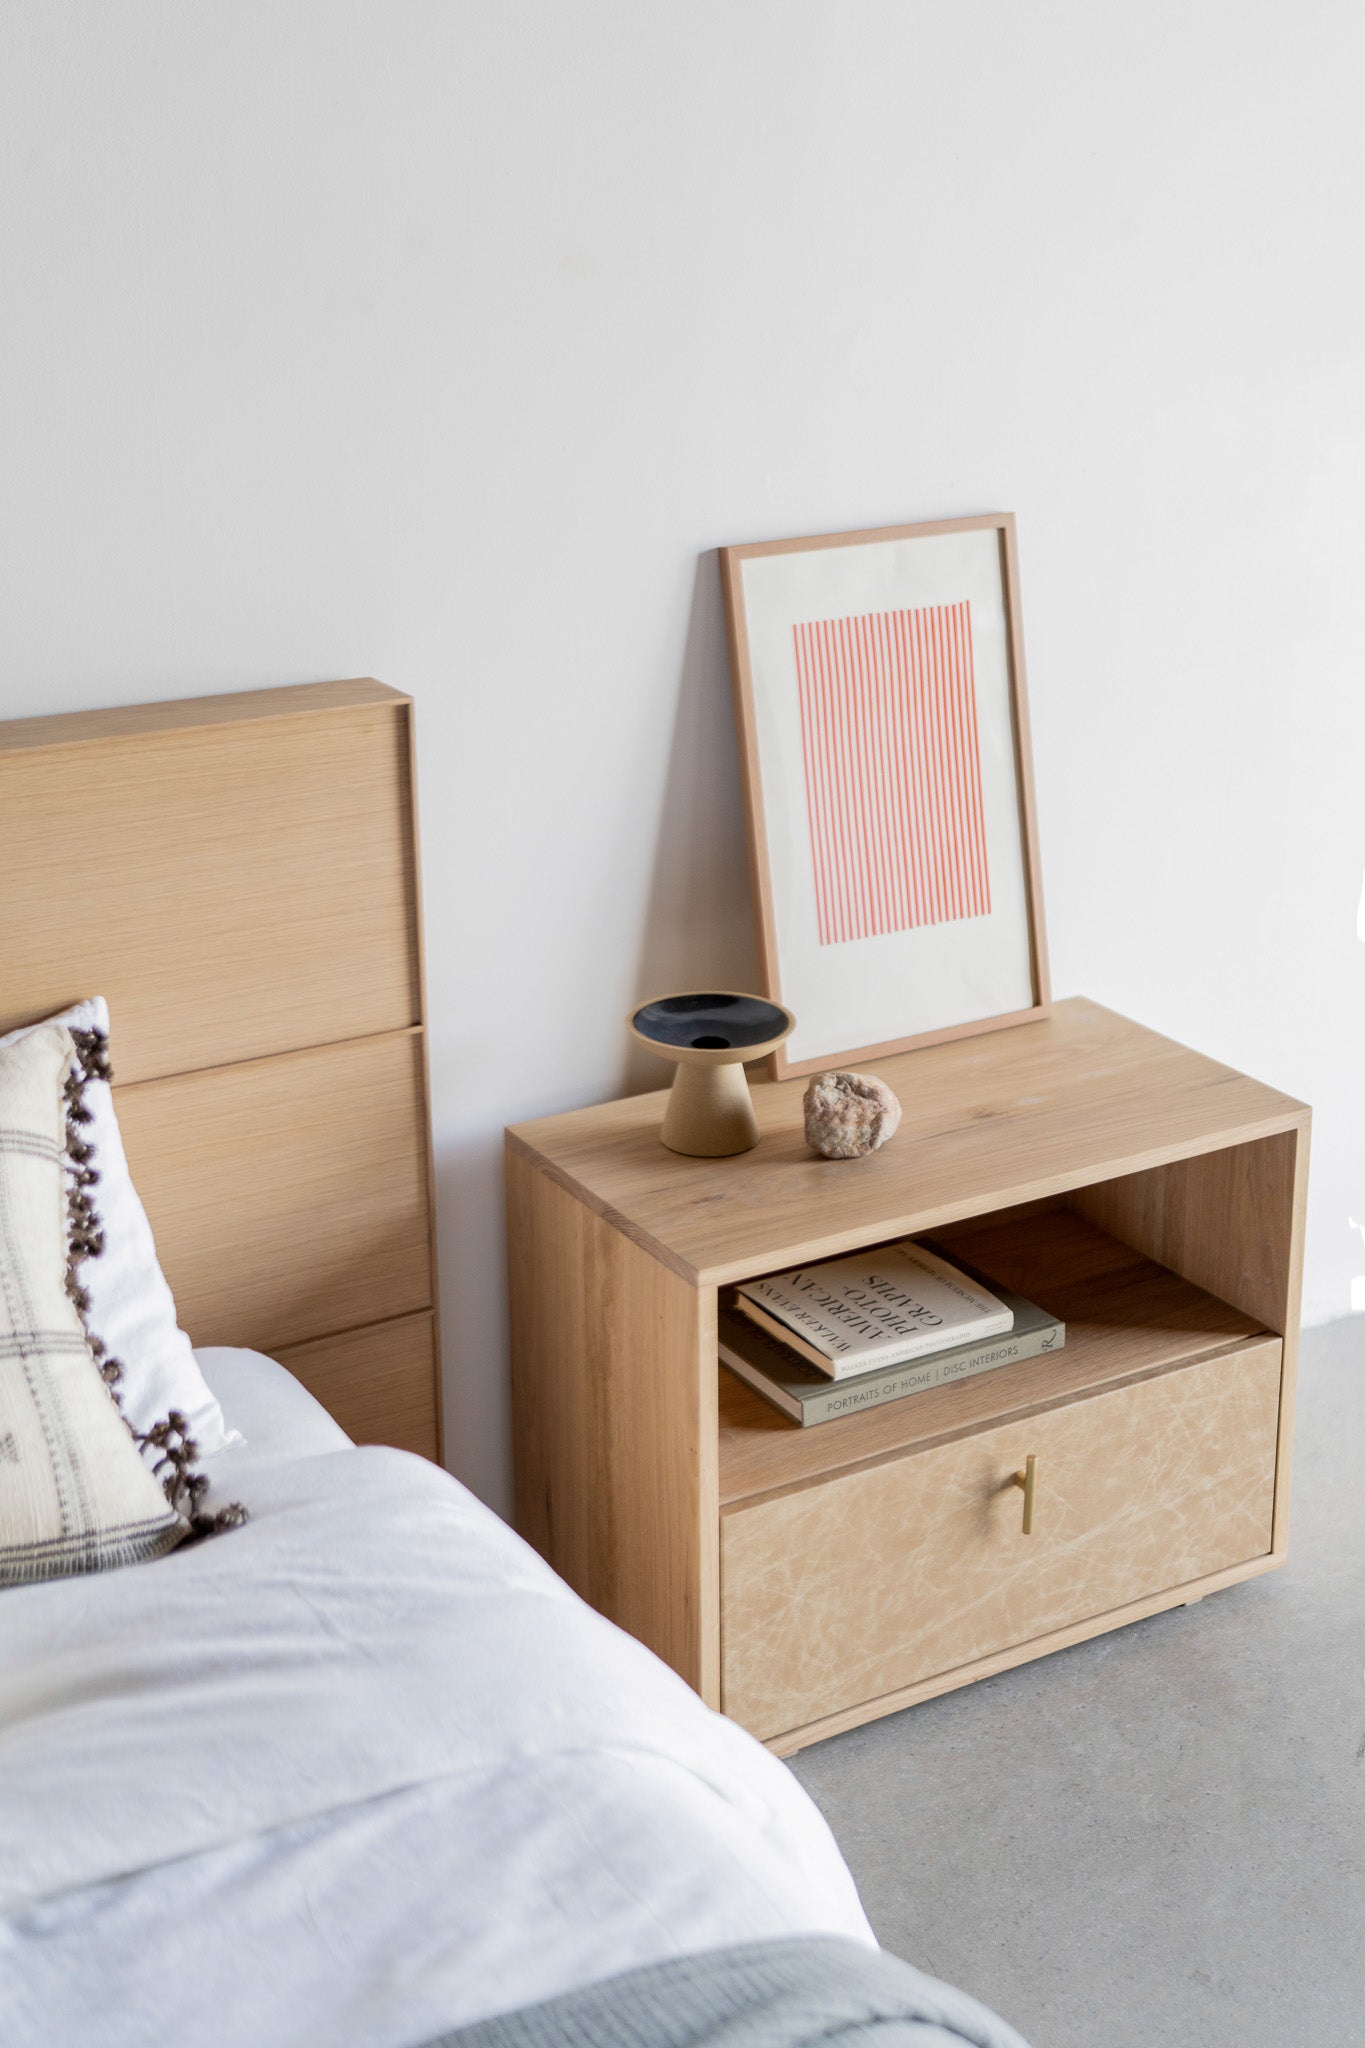 Faria nightstand - wood casing with leather drawer